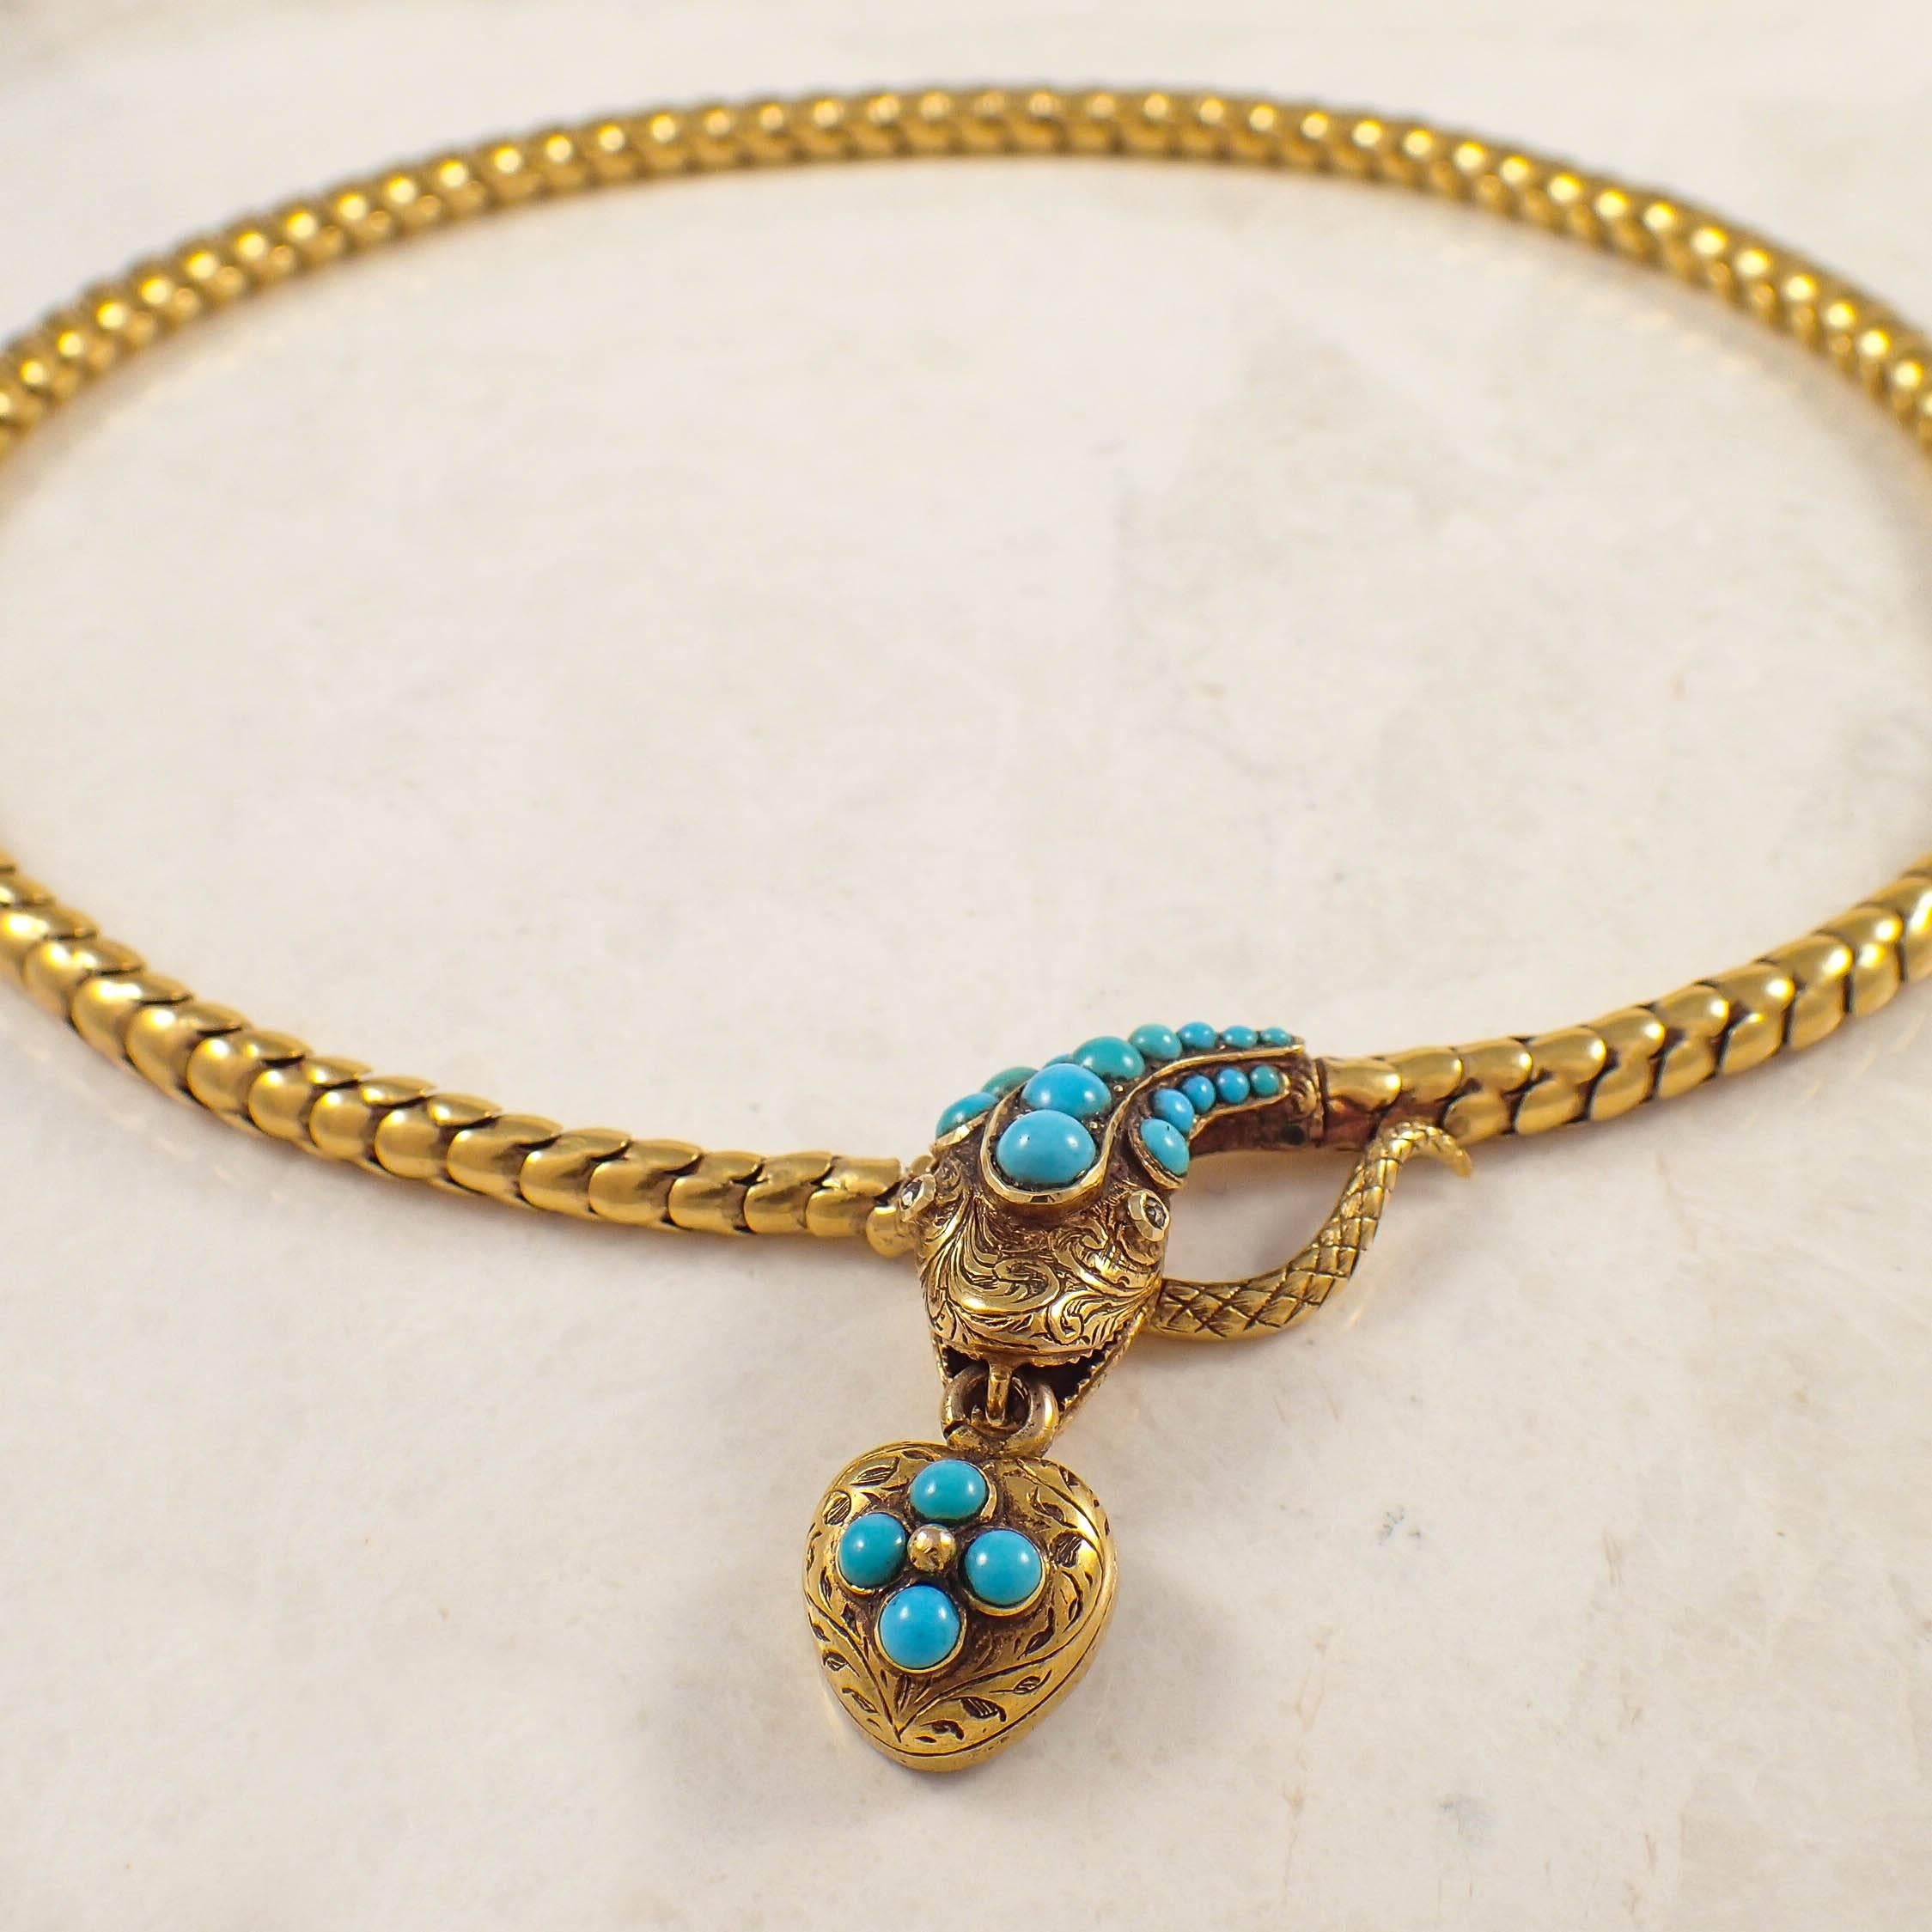 Victorian 14k yellow gold turquoise and diamond snake necklace. The graduated snake-style chain measures from 5.4 to 5.7 mm wide. The snake head front clasp features small diamond eyes, and is decorated with small cabochon cut turquoise. The